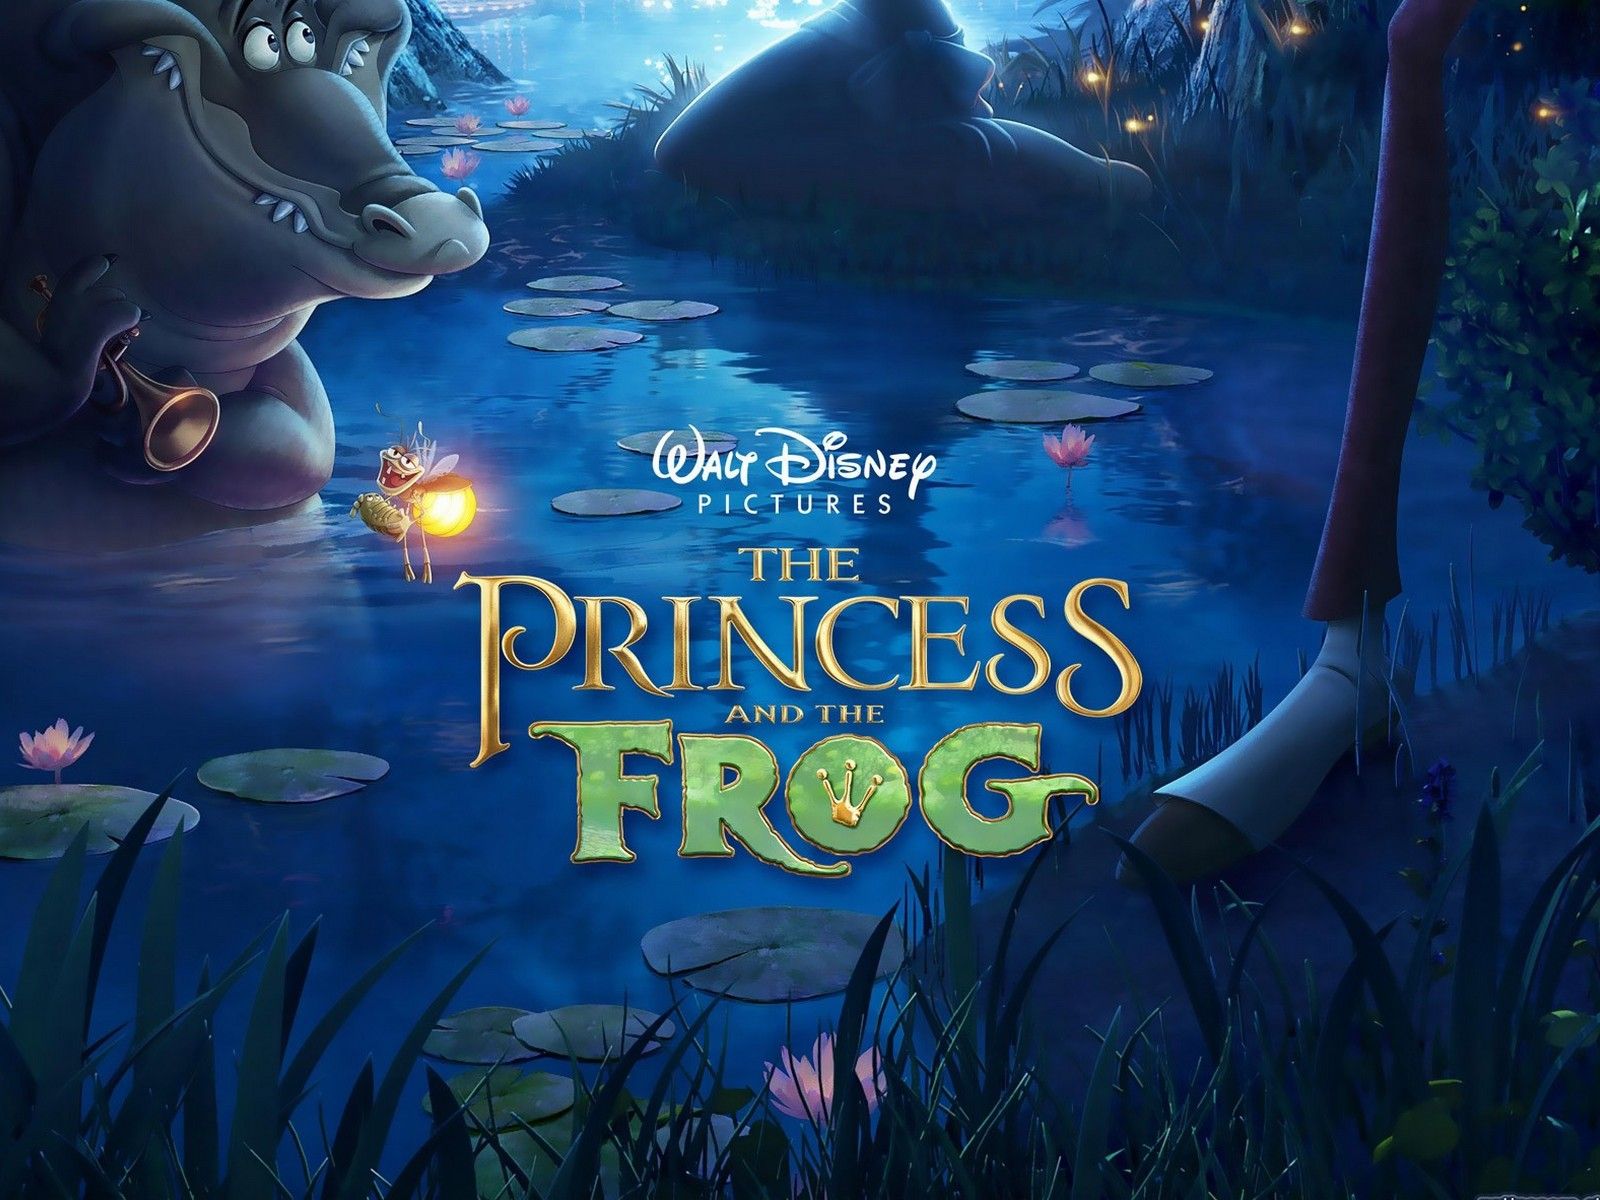 30 the princess and the frog Wallpaper backgrounds - Desktop ...